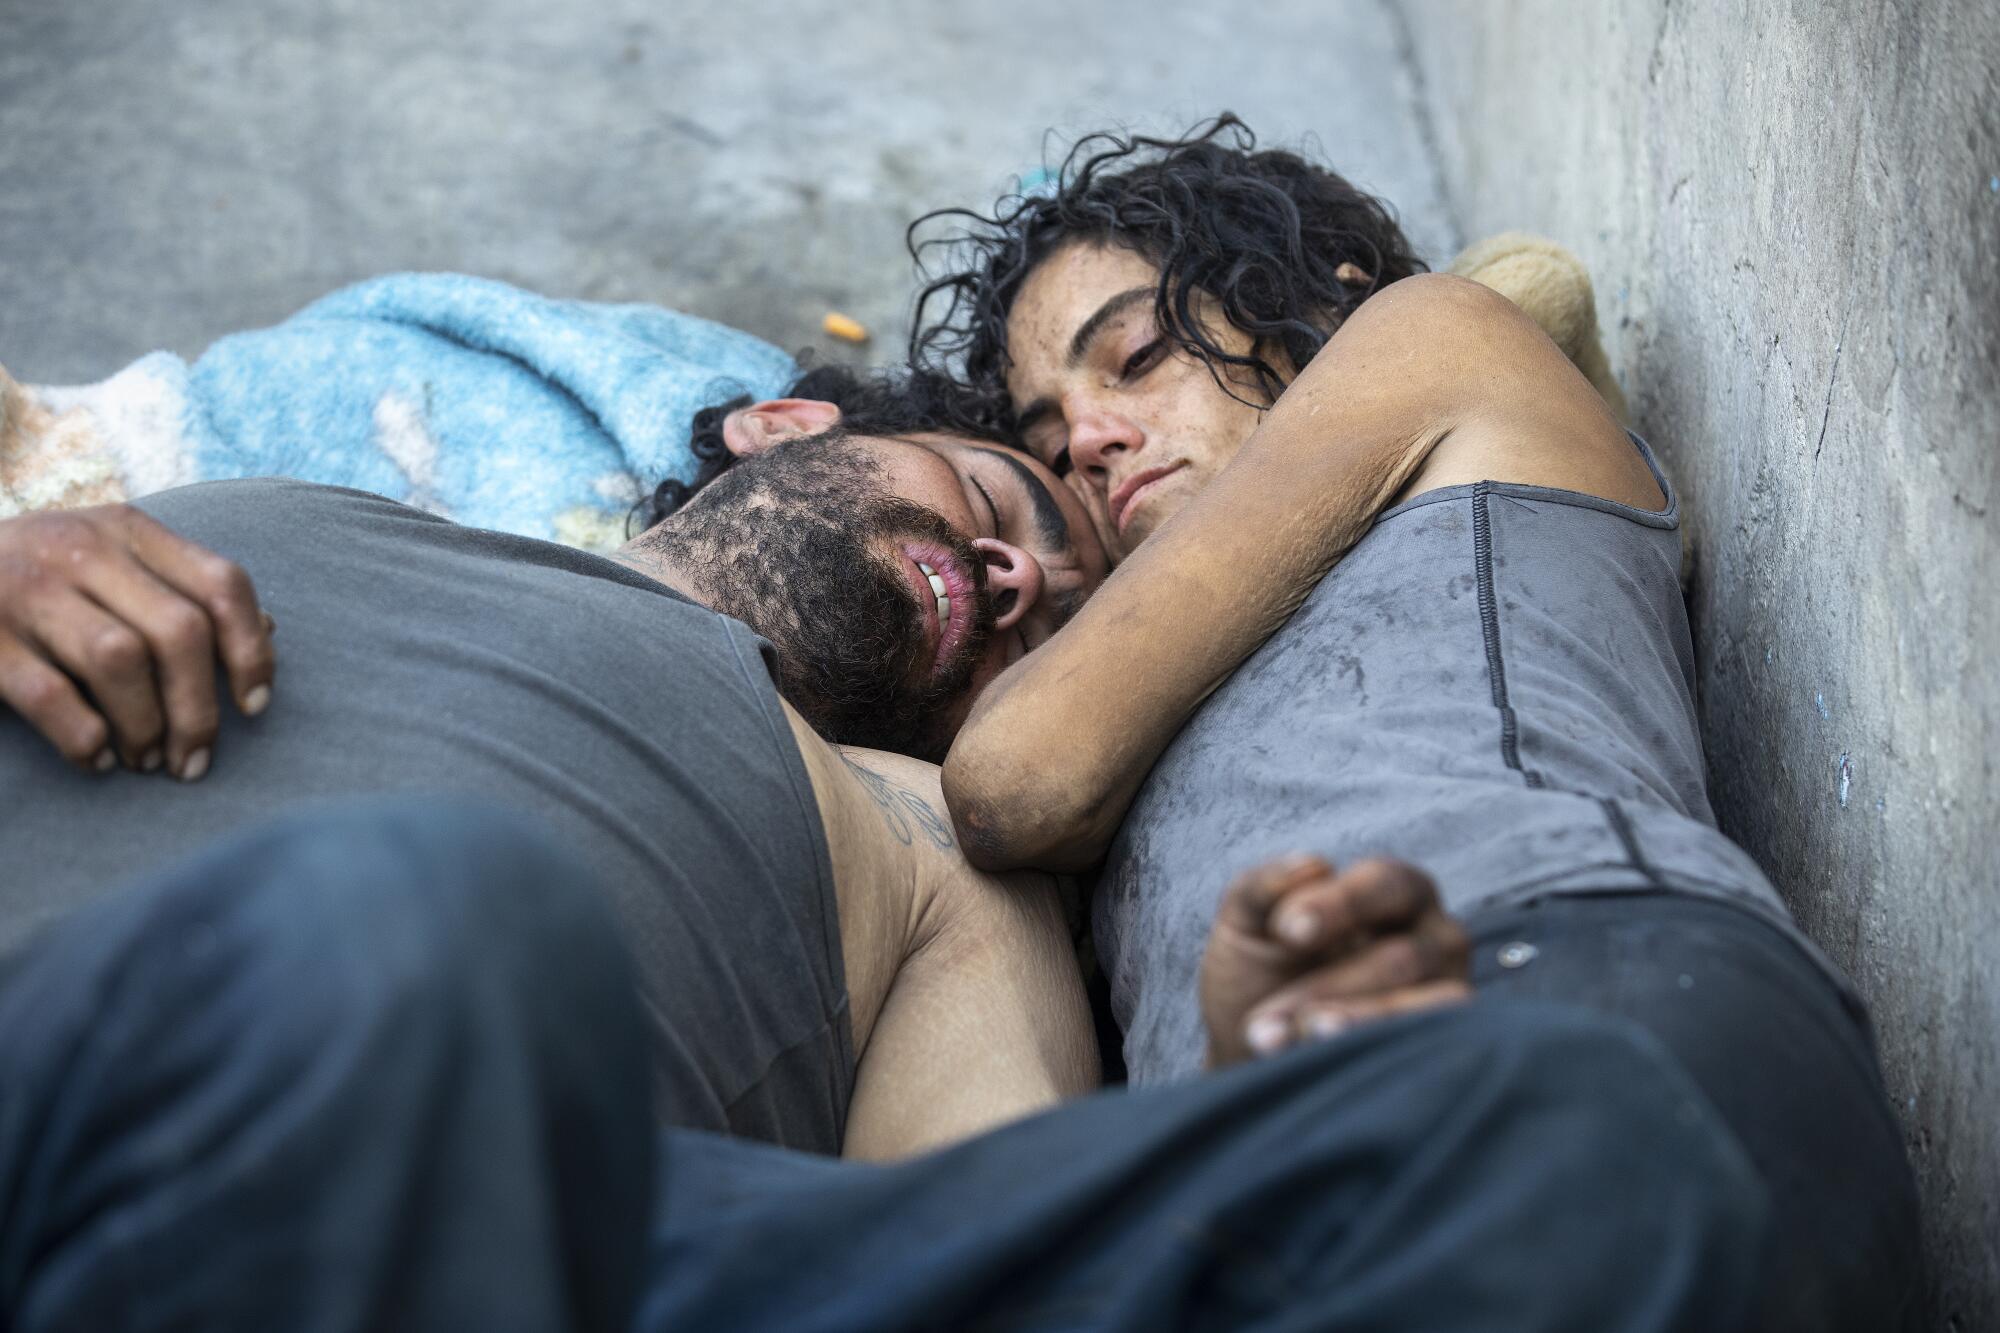 A homeless couple lie down on a blanket on concrete